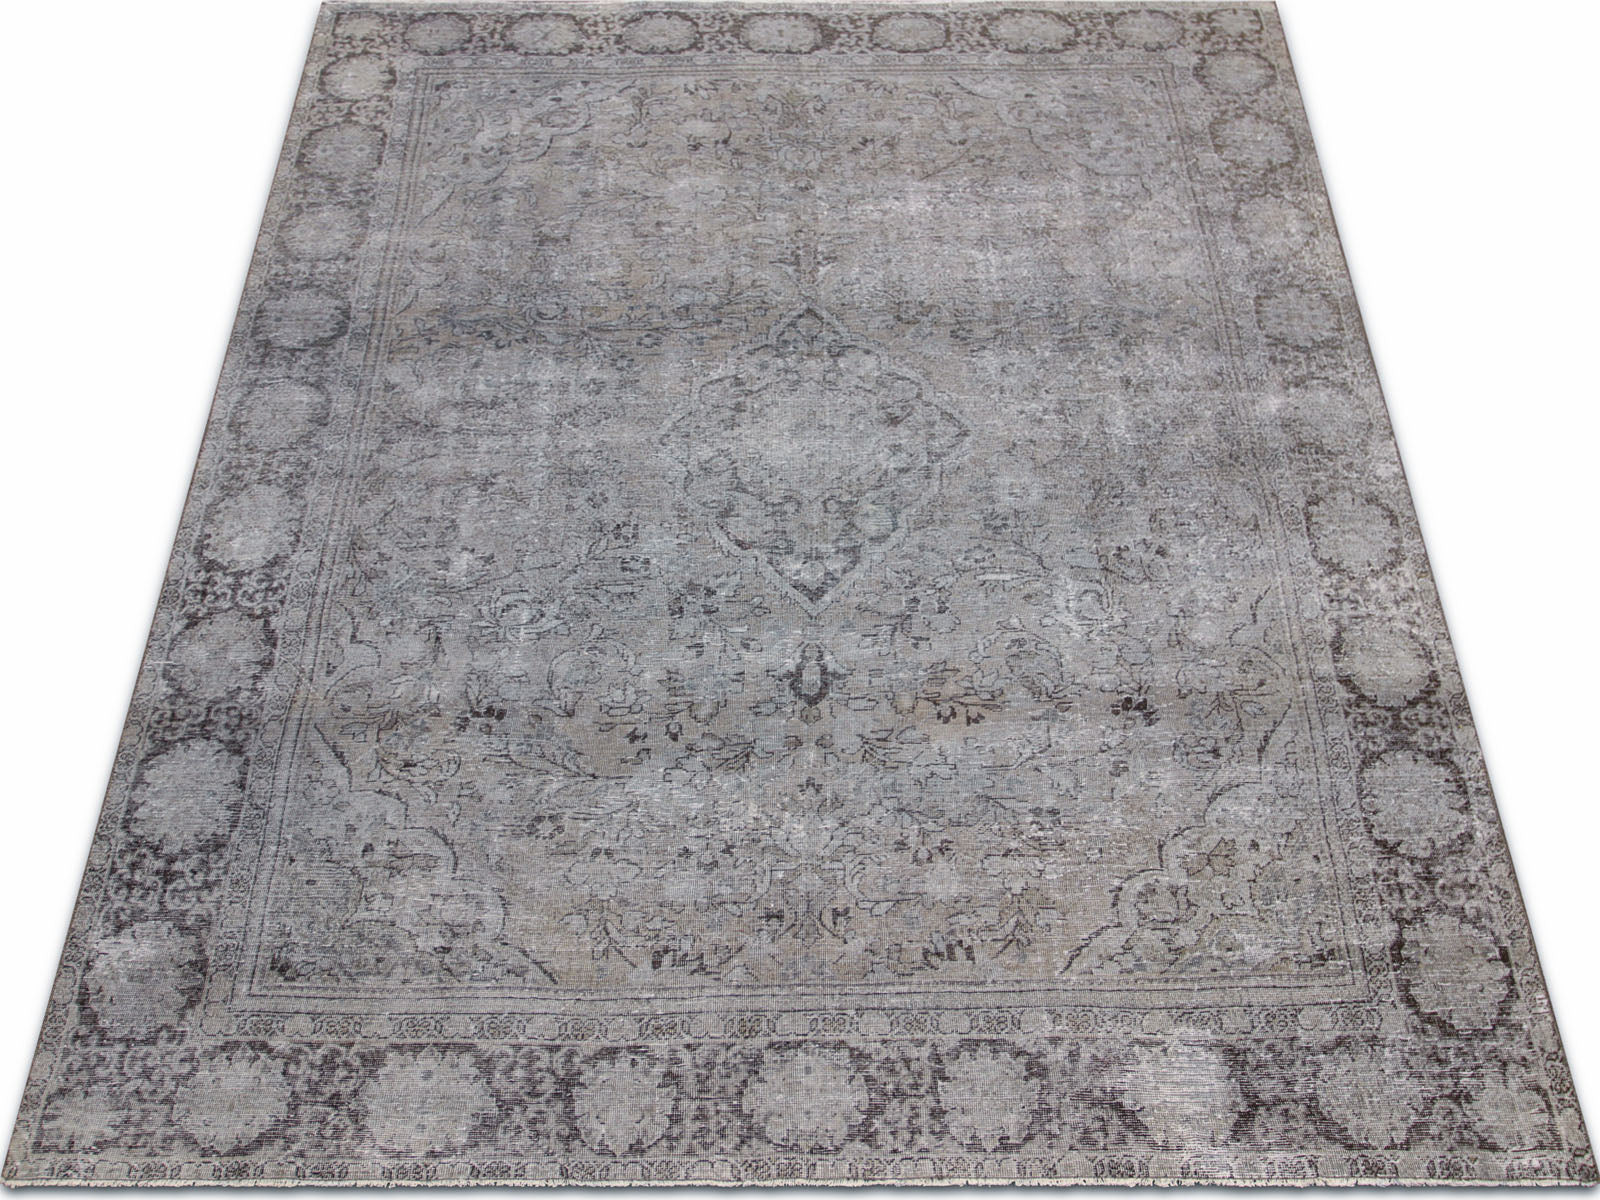 Vintage Persian Meshed Overdyed Rug - 8'4" x 11'5"